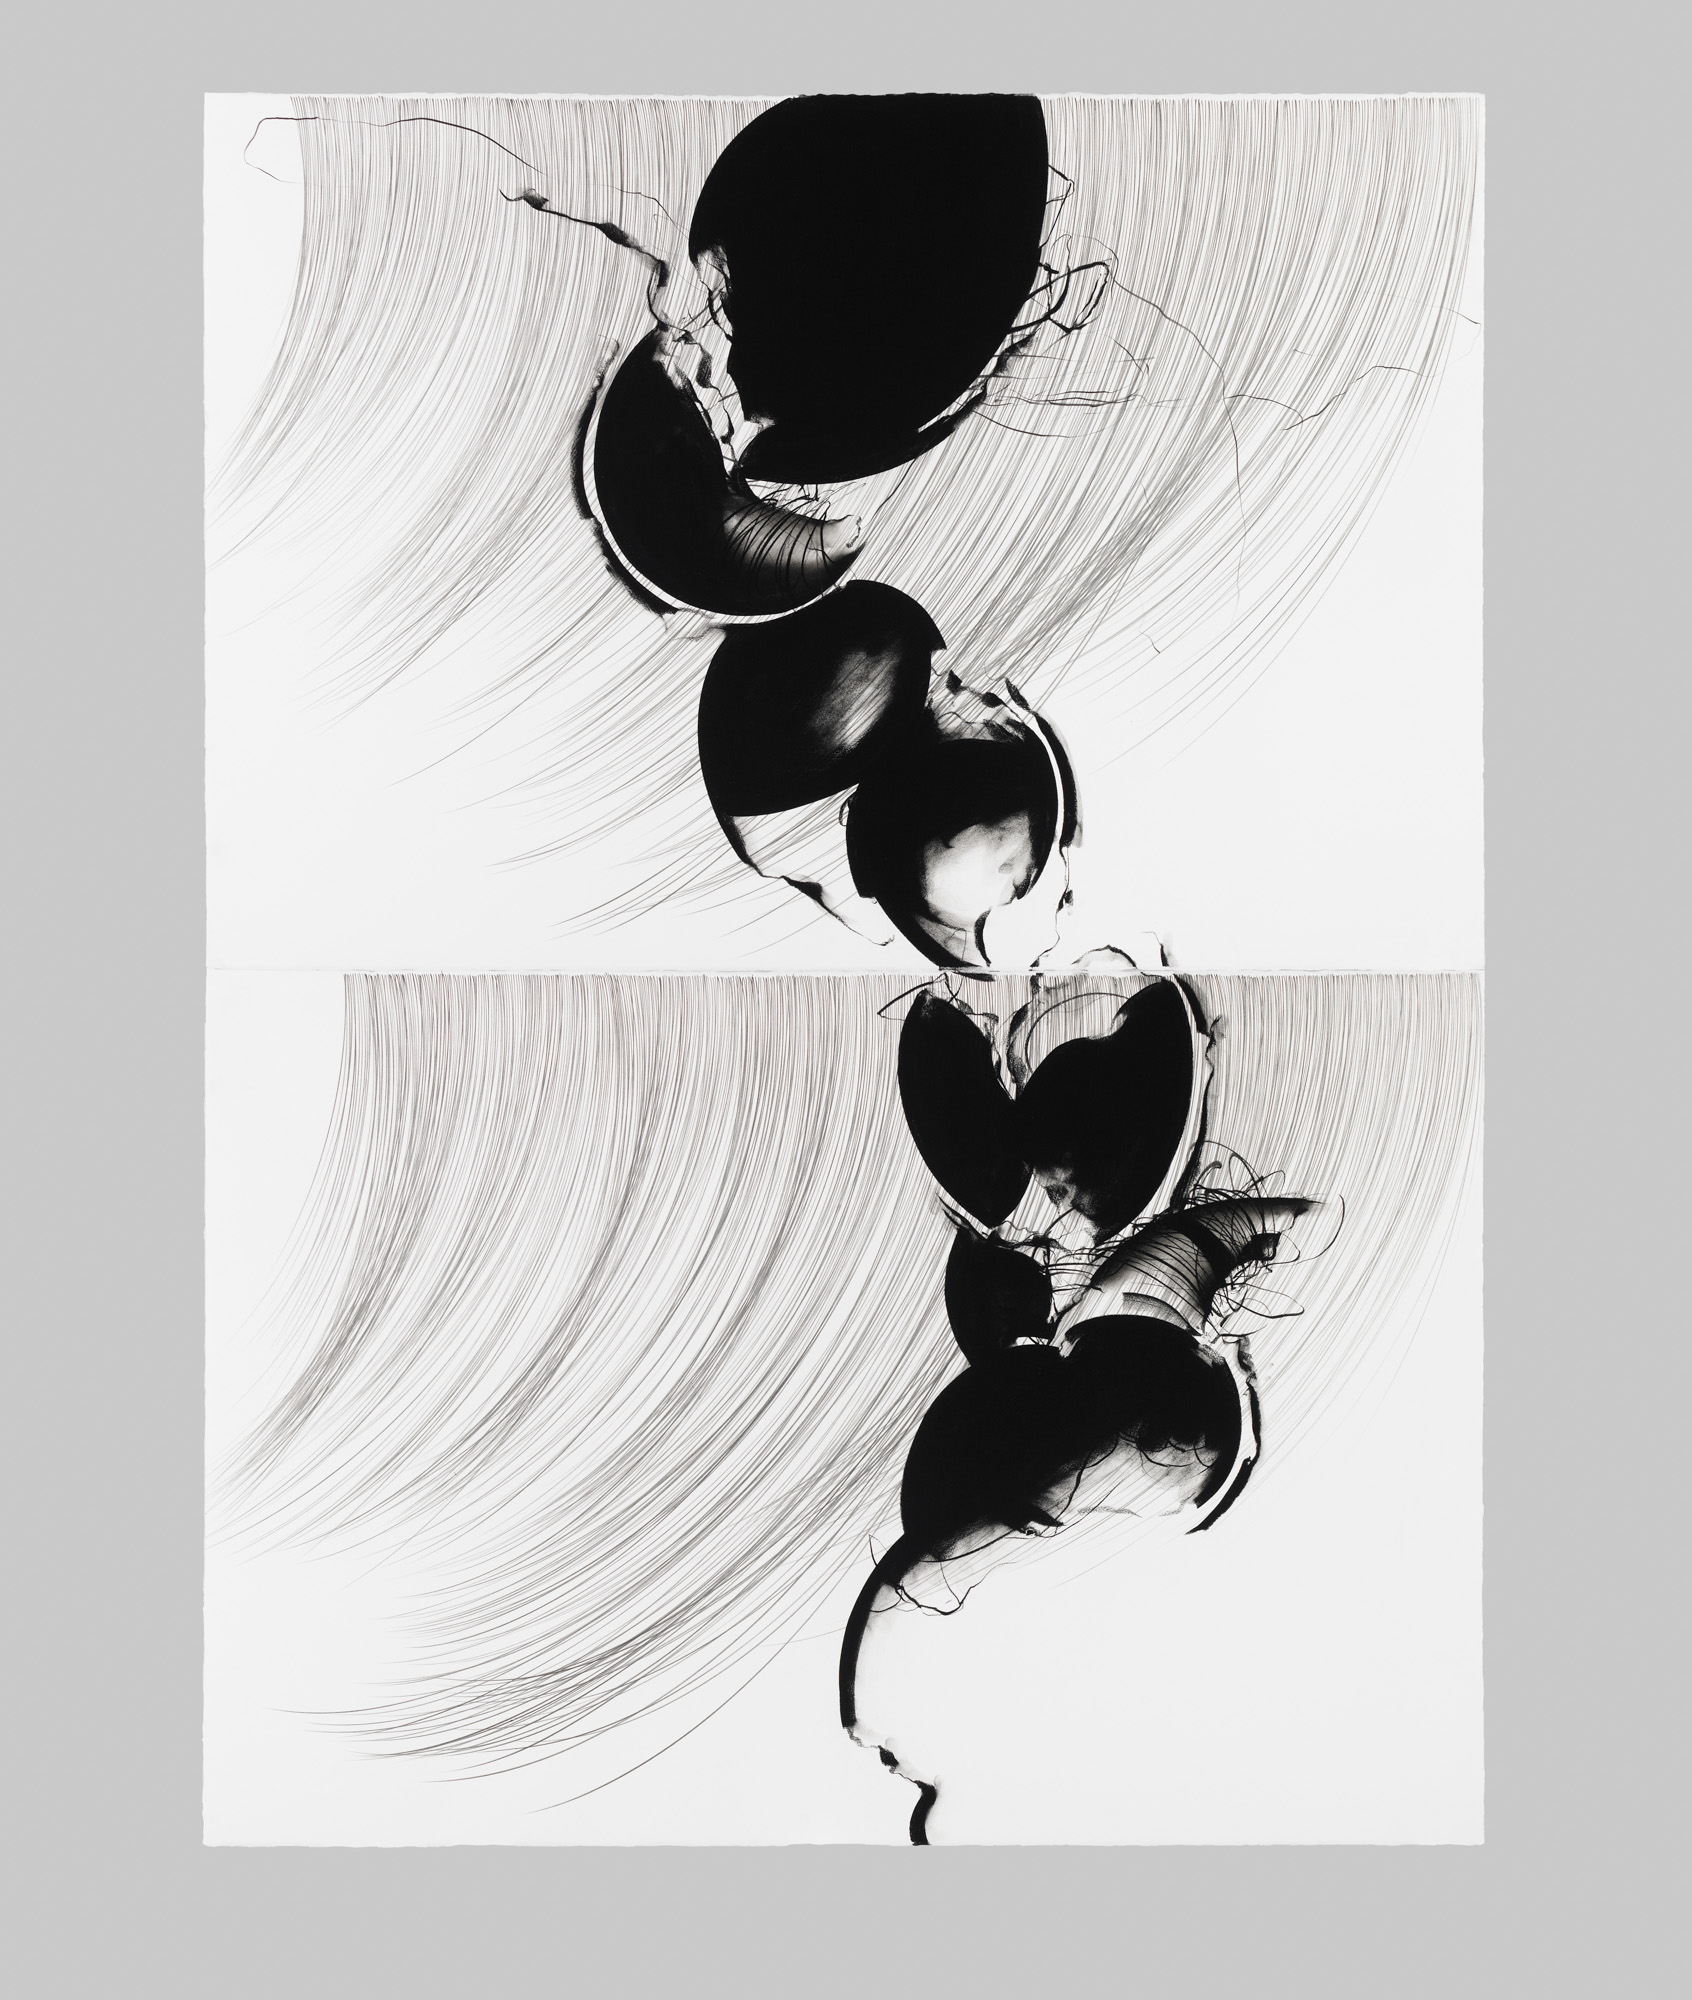 Quarry, VII  Pastel pigment and graphite on cotton paper, 60 x 44 inches, diptych, 2015